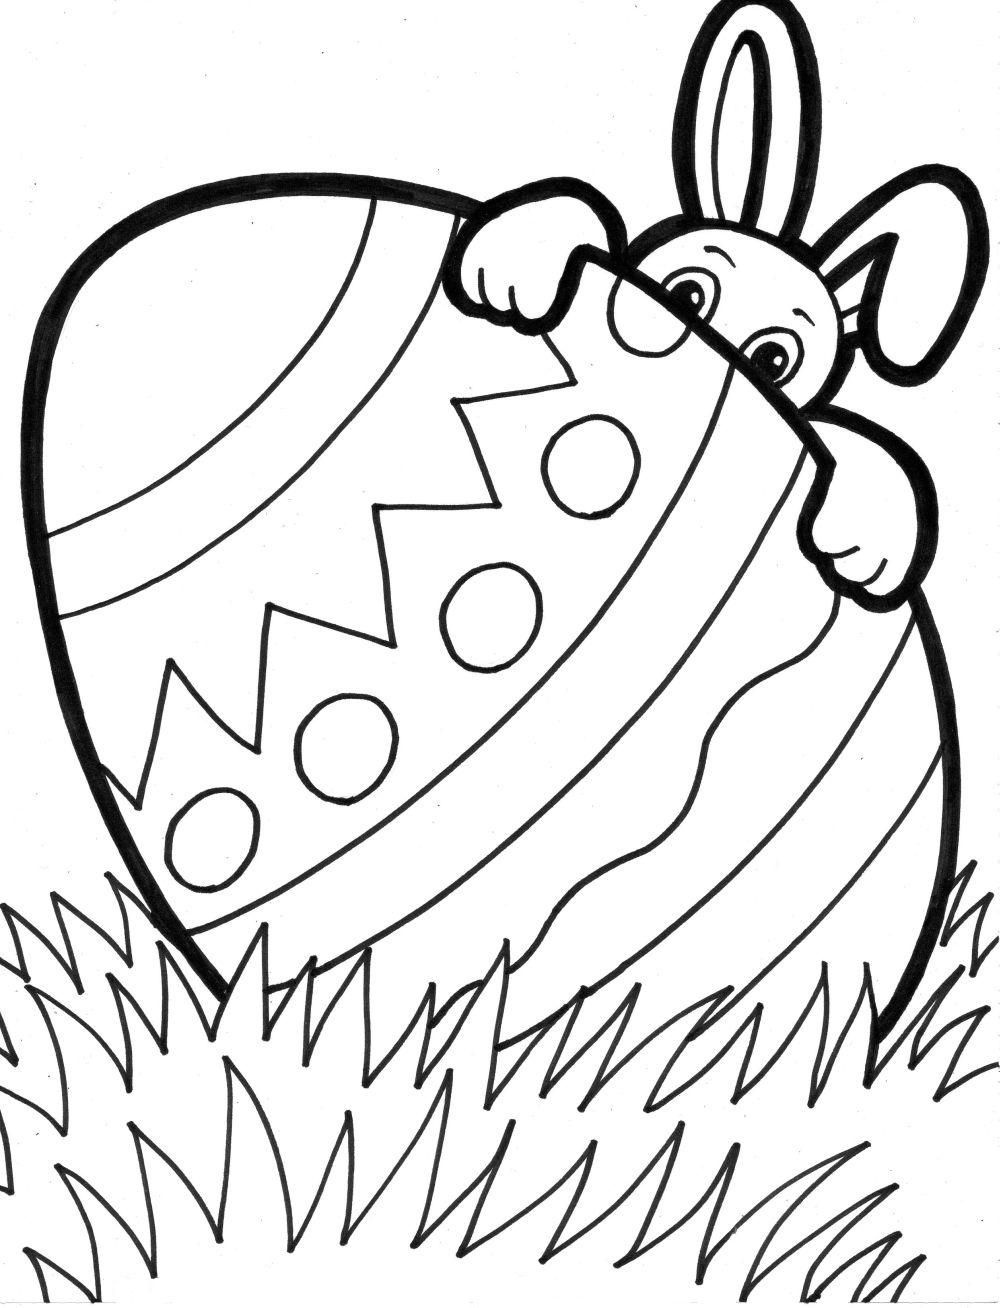 Coloring Page ~ Free Printable Easter Coloringes Extraordinary - Coloring Pages Free Printable Easter